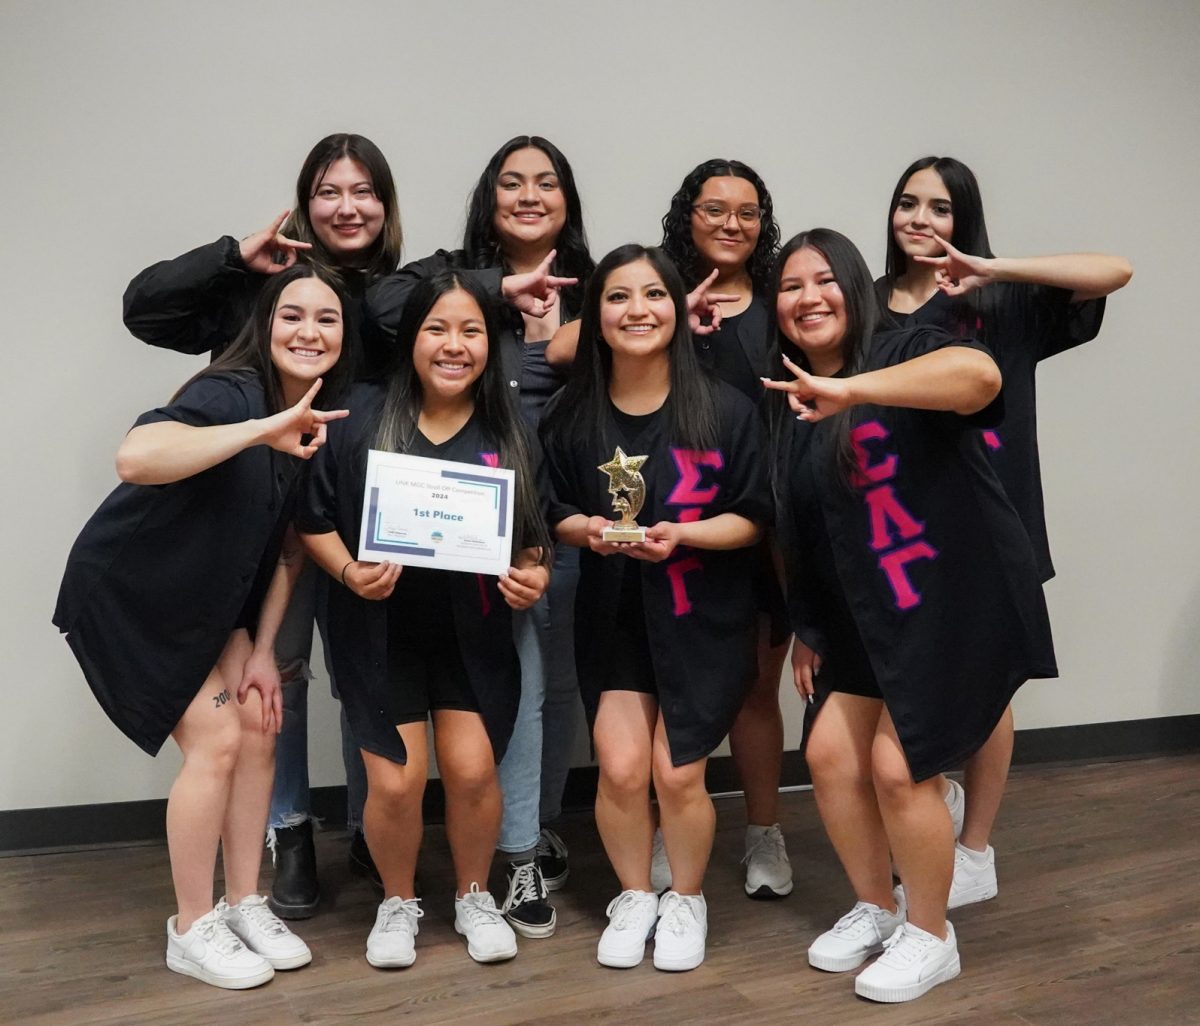 Sigma+Lambda+Gamma+National+Sorority%2C+Inc.+pose+with+their+trophy.+Photo+by+Shelby+Berglund+%2F+Antelope+Staff